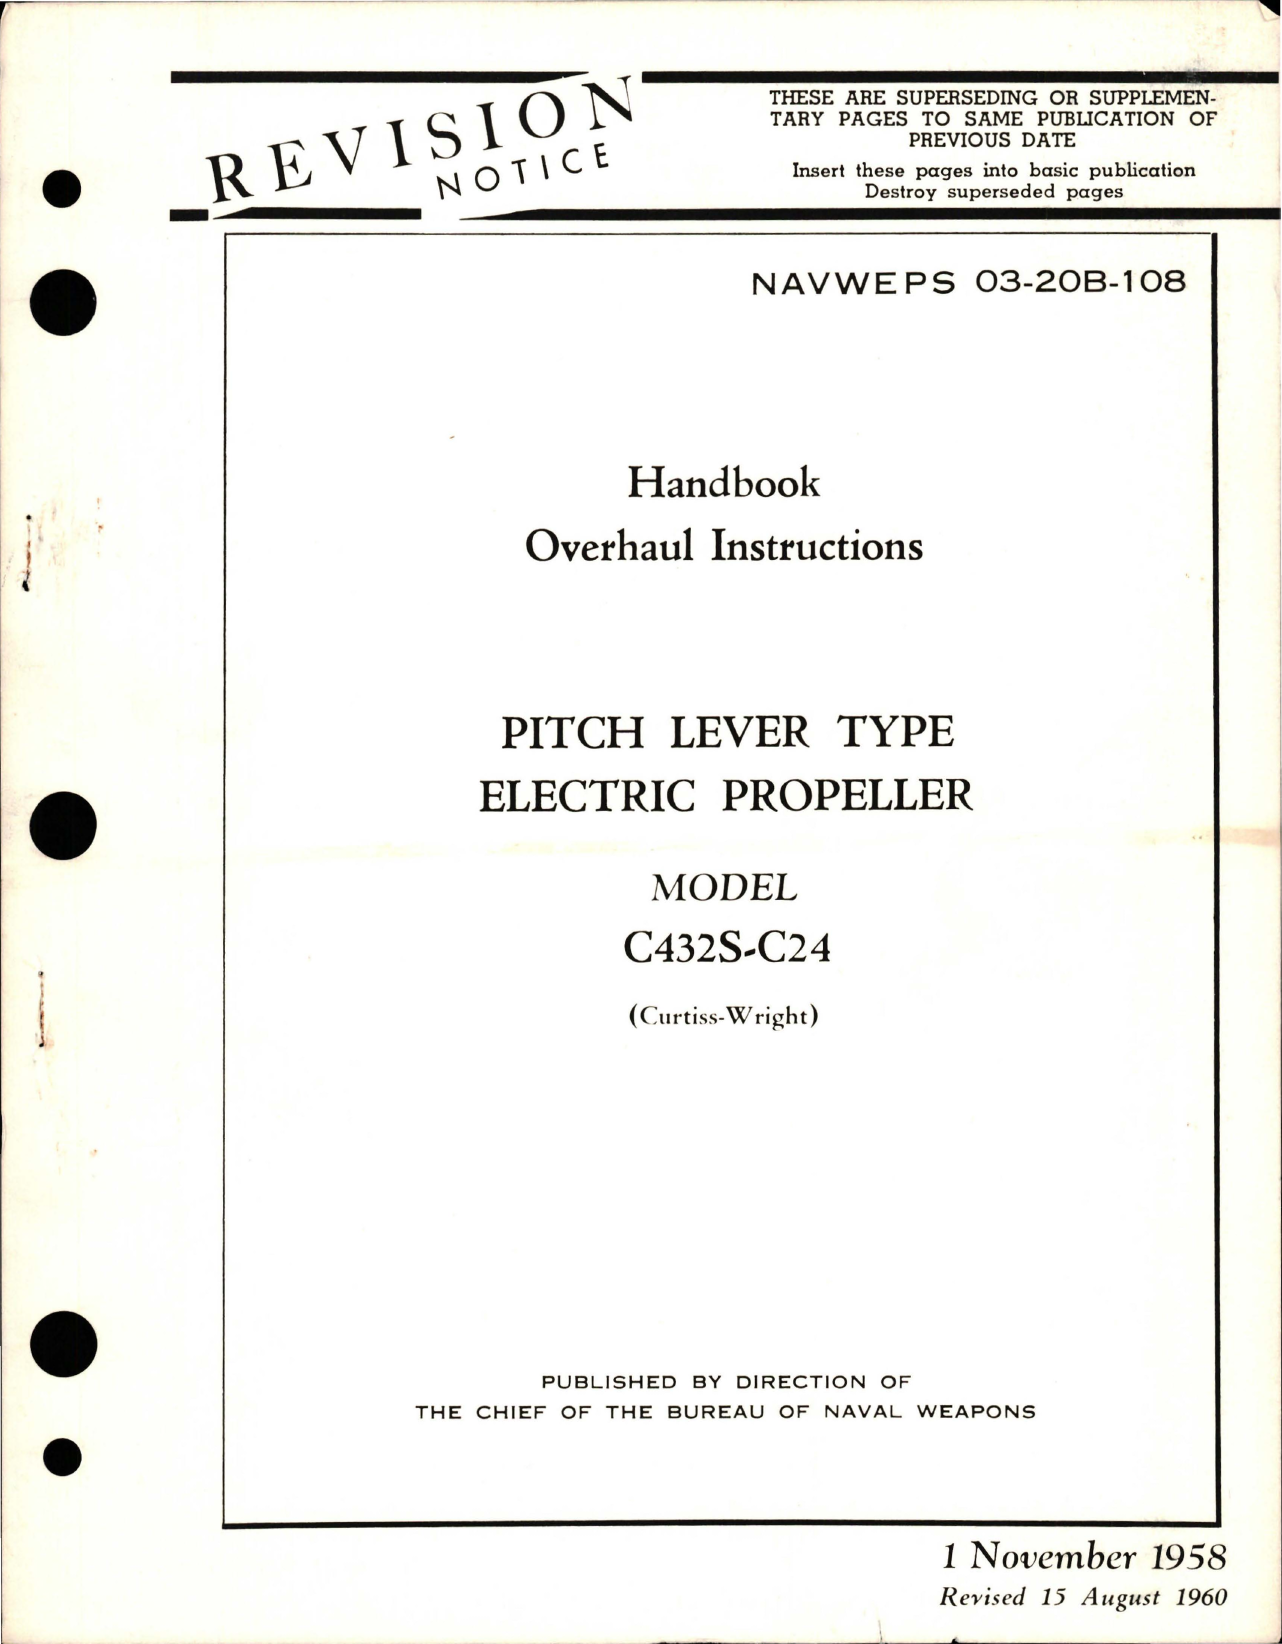 Sample page 1 from AirCorps Library document: Overhaul Instructions for Pitch Lever Type Electric Propeller - Model C42S-C24 